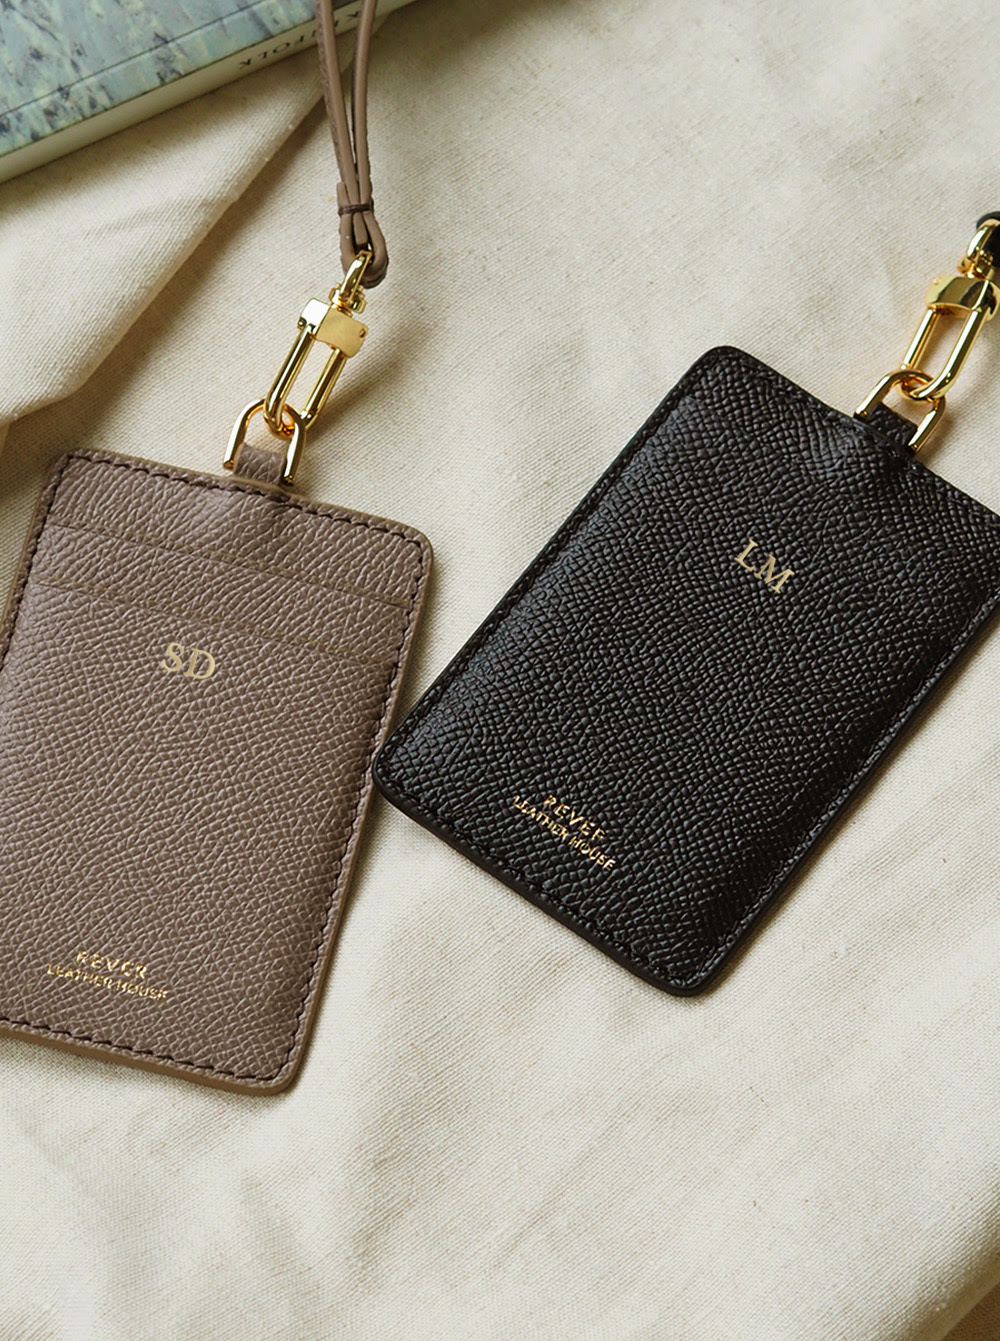 Rever Personalised Fine Leather Goods - Leon Lanyard Card Holder in Taupe and Black German Epsom Leather